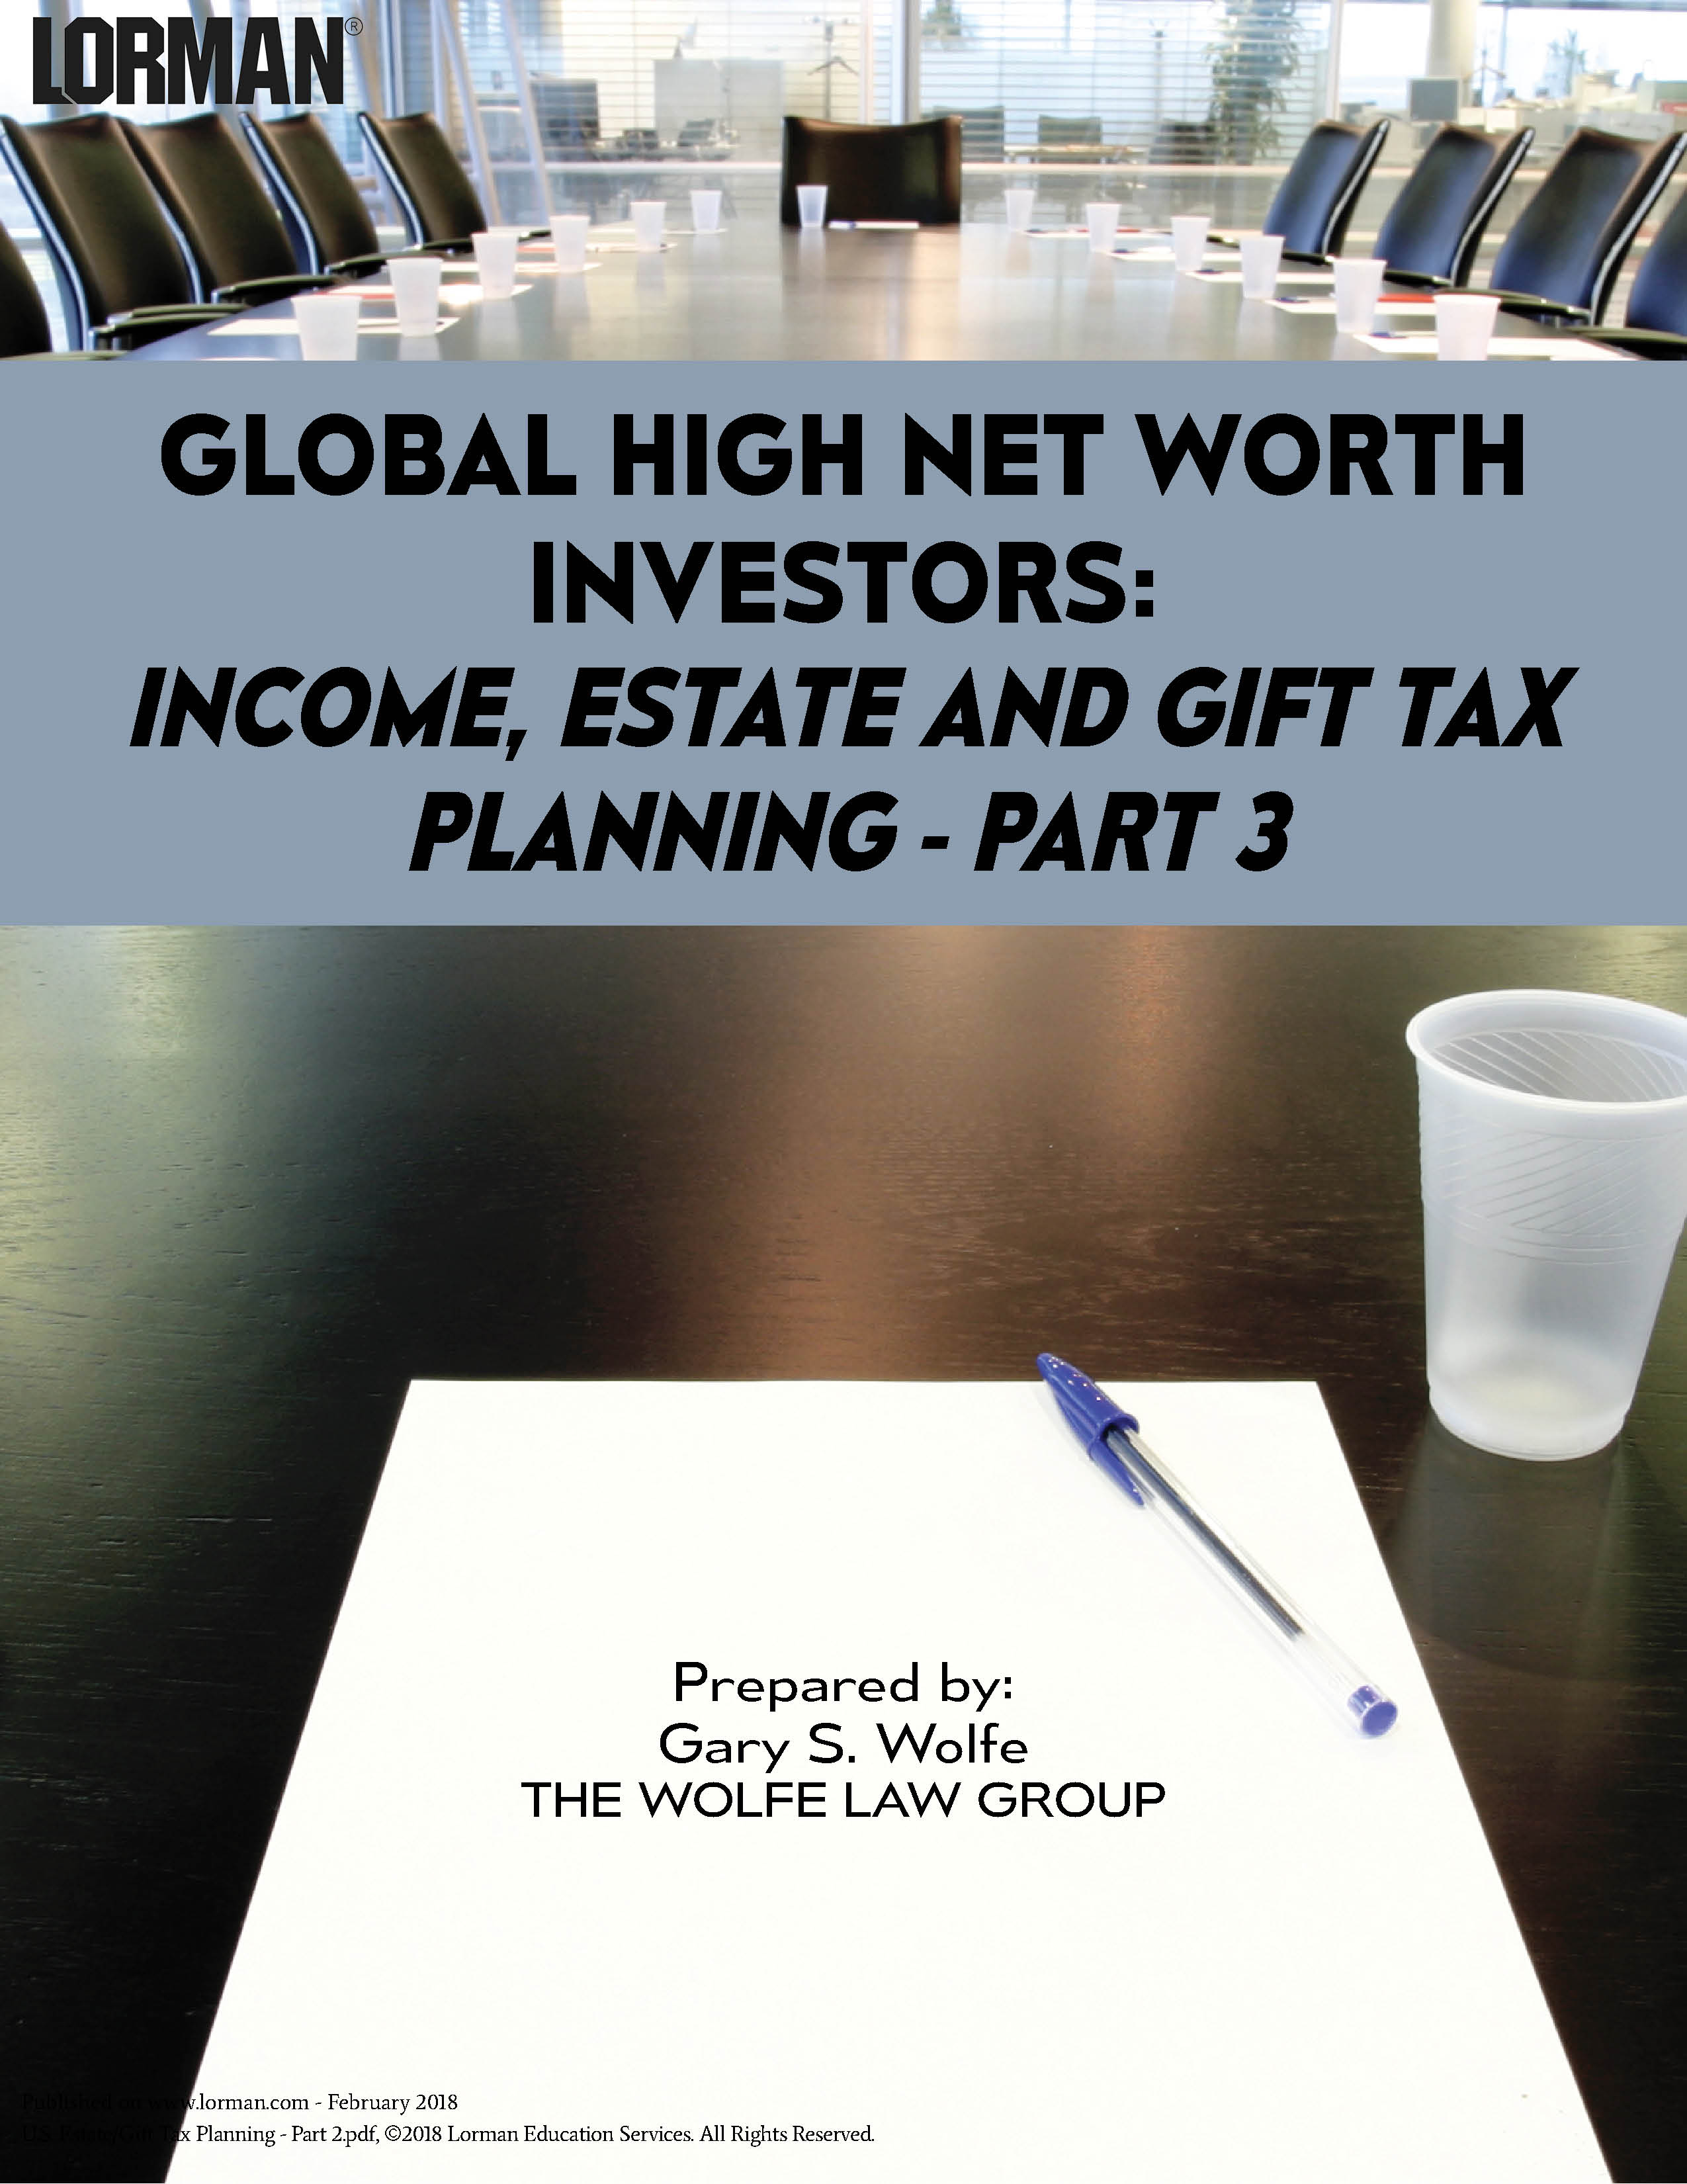 Global High Net Worth Investors:  Income, Estate and Gift Tax Planning - Part 3